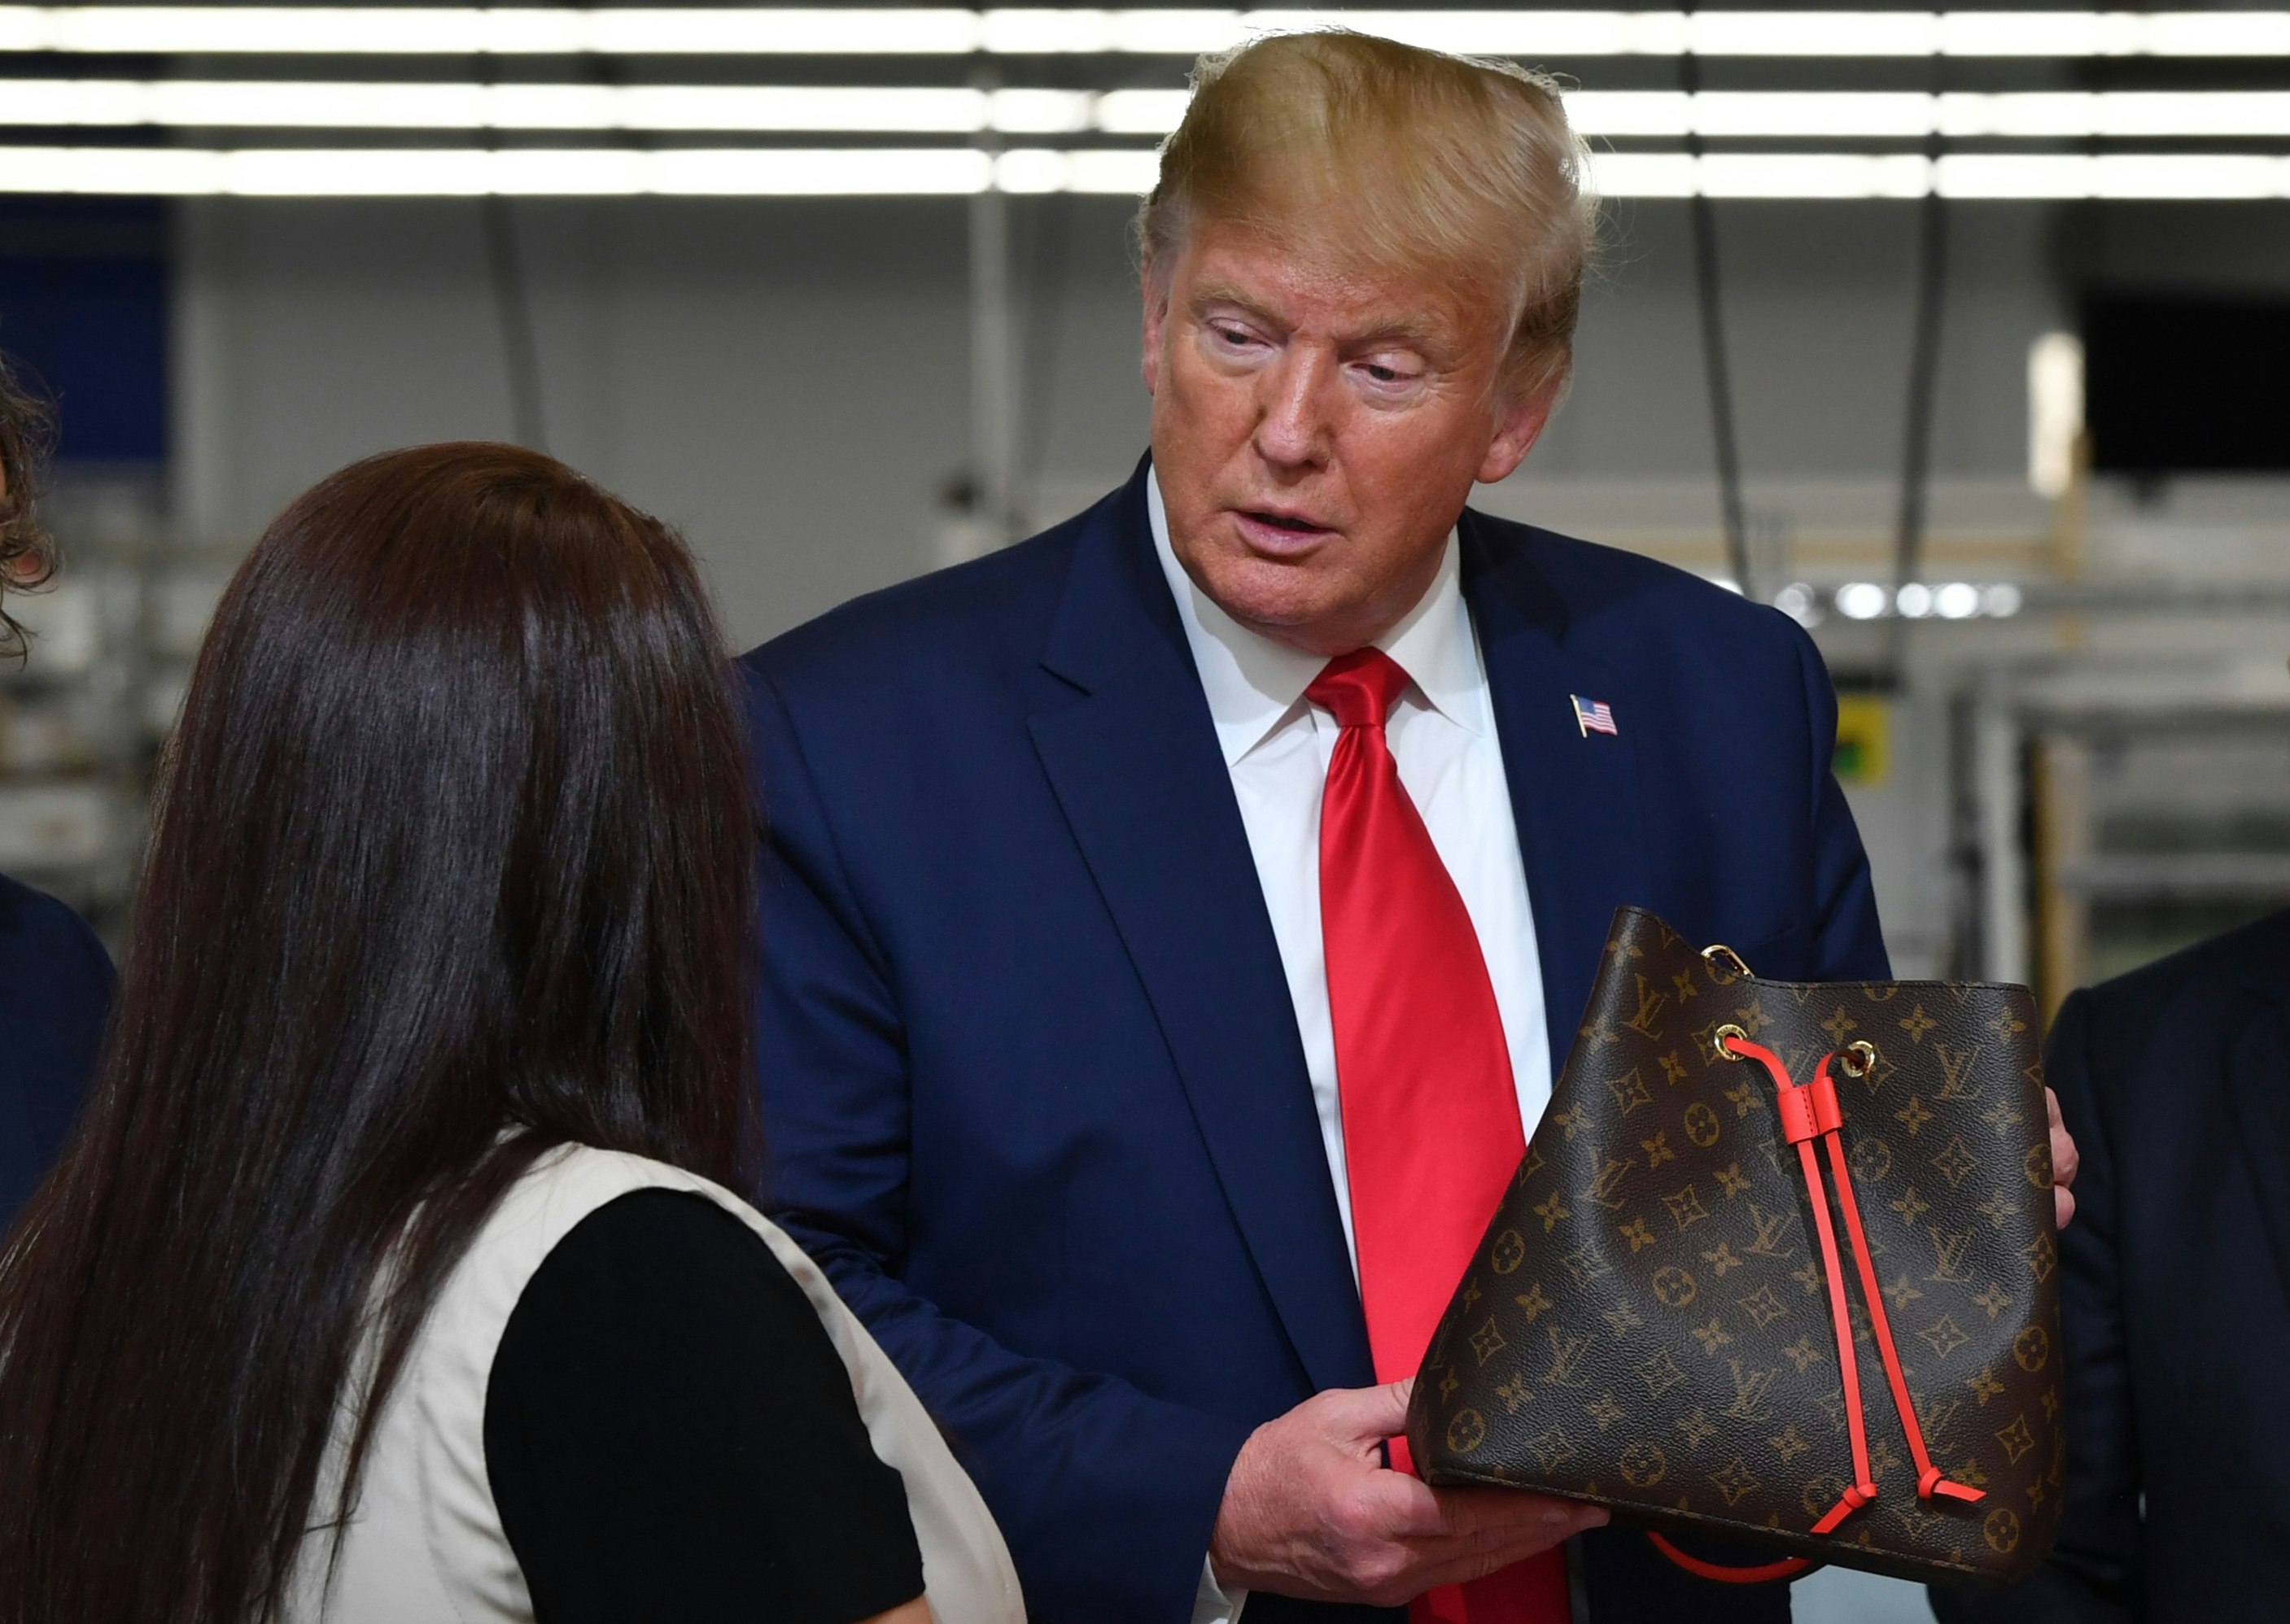 Louis Vuitton welcomed Trump to the opening of its new factory